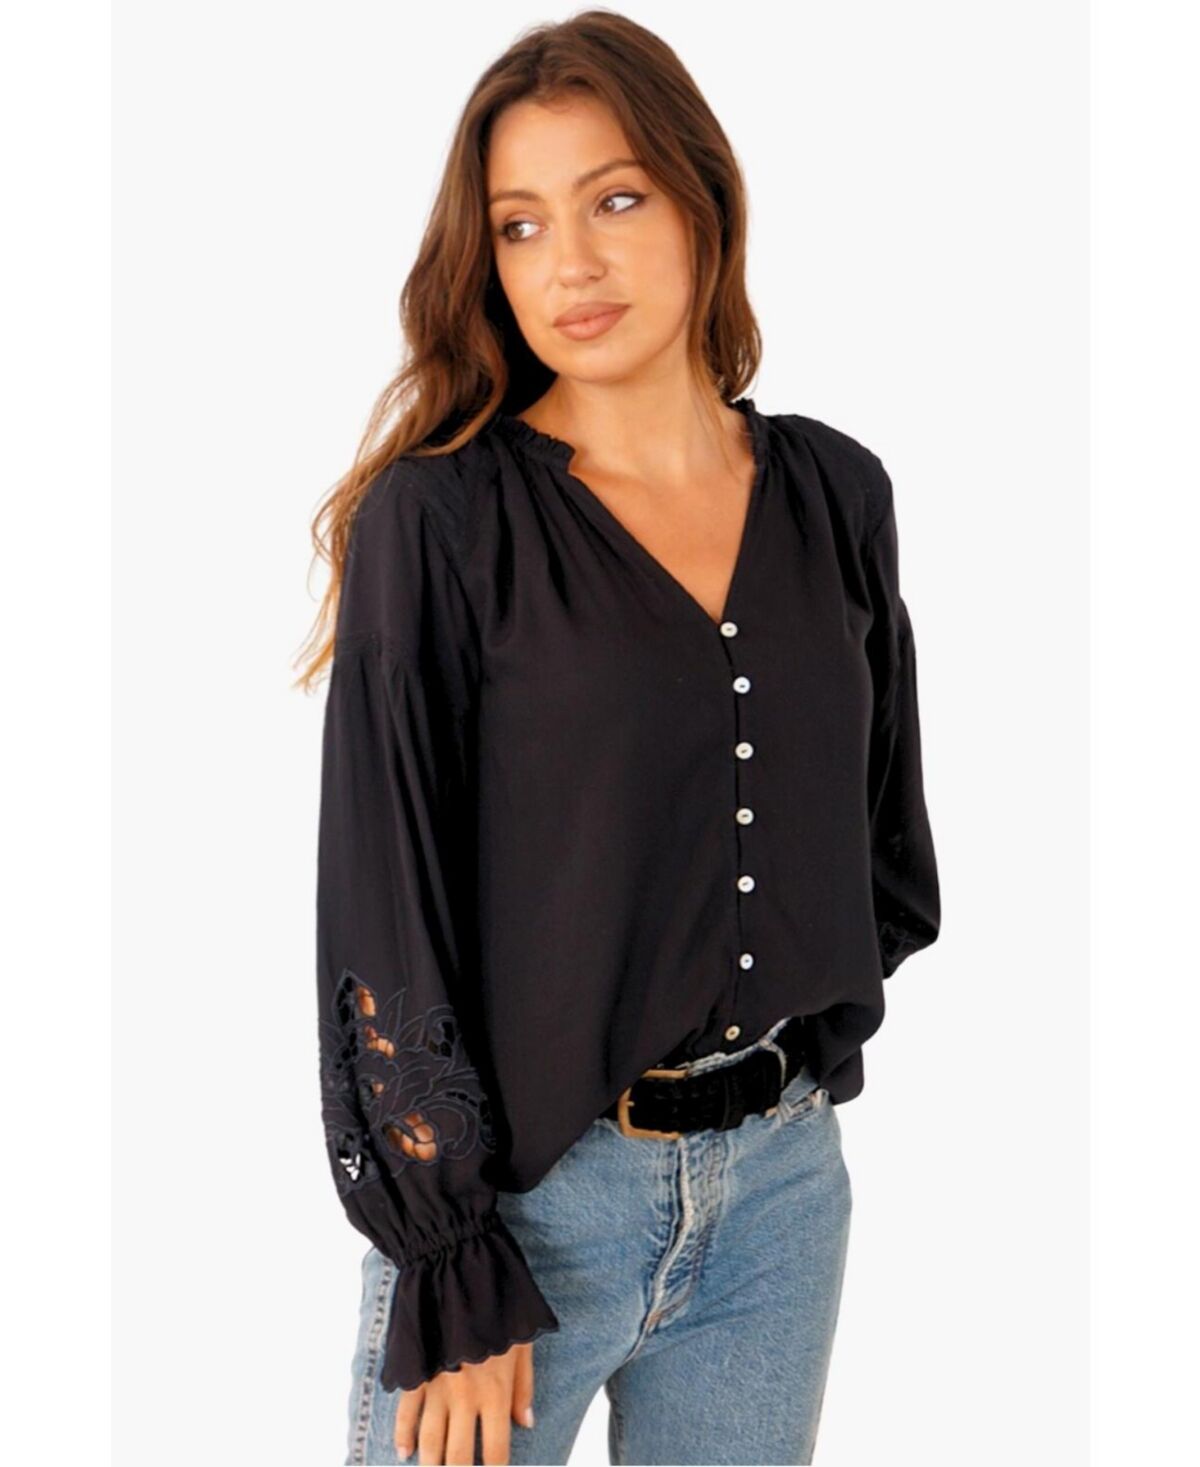 Paneros Clothing Women's Long Sleeve Embroidered Stevie Blouse - Black